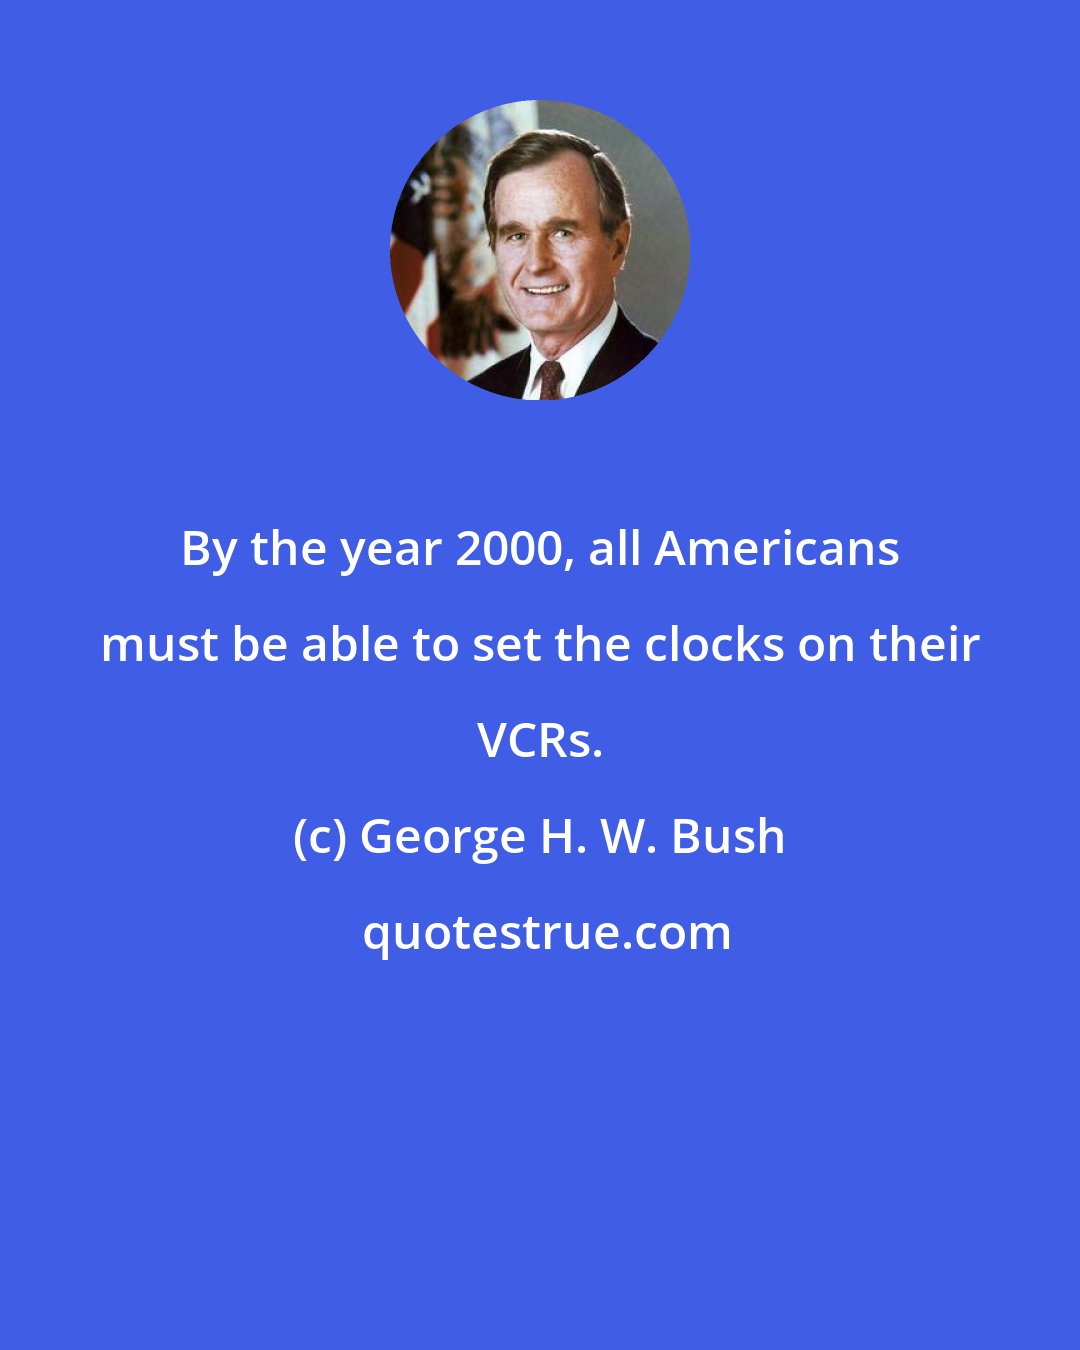 George H. W. Bush: By the year 2000, all Americans must be able to set the clocks on their VCRs.